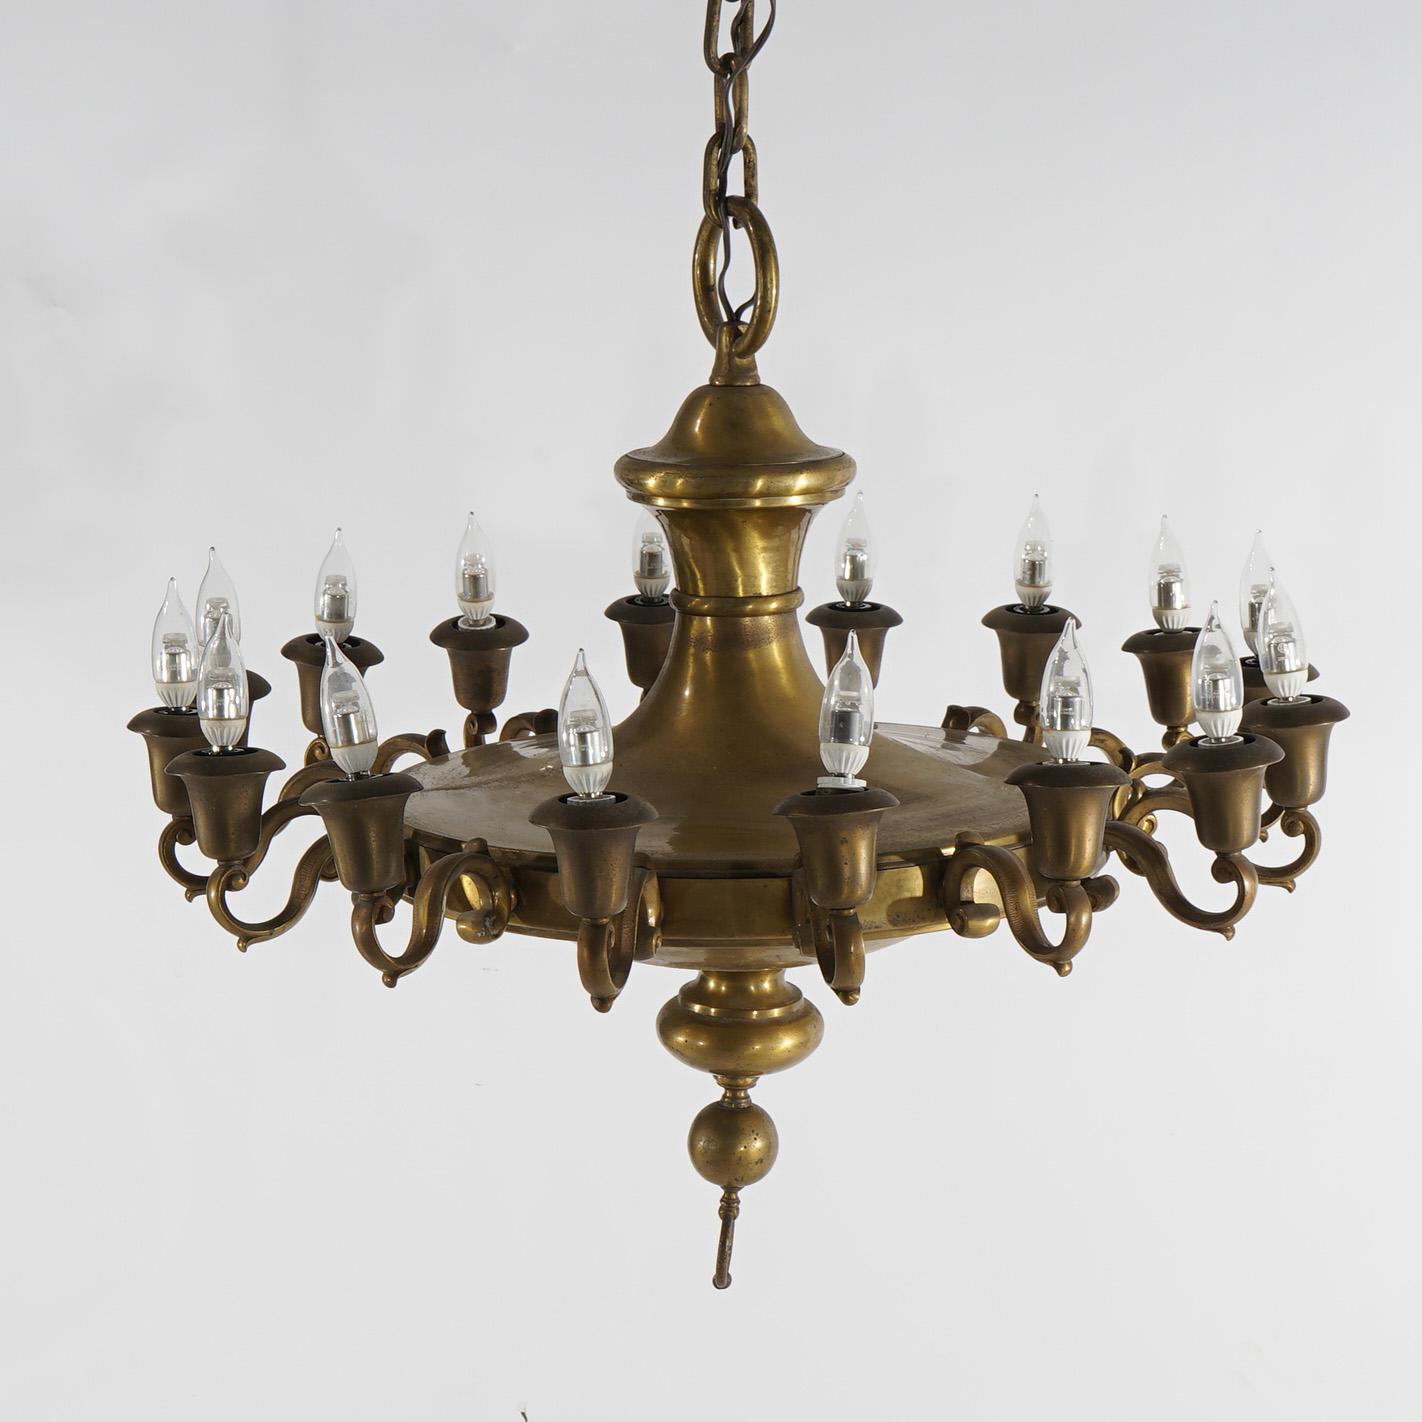 Ebonized Antique Oversized French Empire Style Brass  16-Light Pan Chandelier, 20th C For Sale